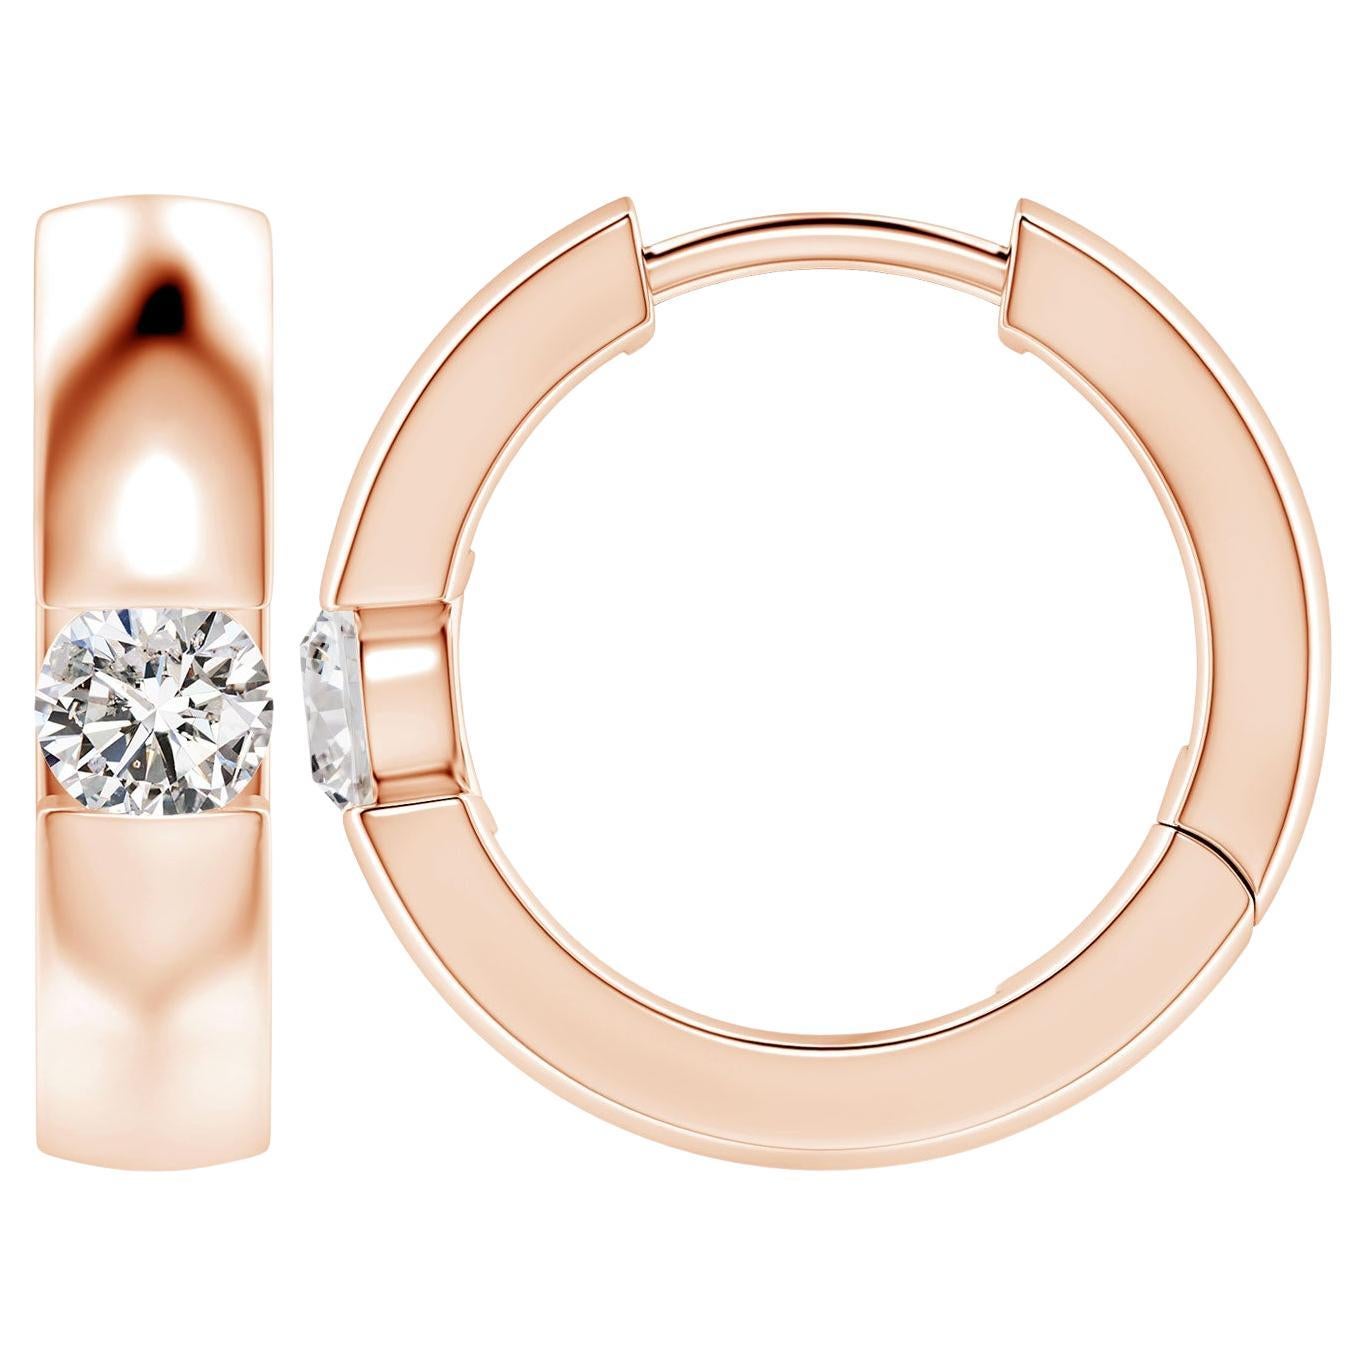 ANGARA Natural Round 0.35ct Diamond Hoop Earrings in 14K Rose Gold (Color-I-J) For Sale